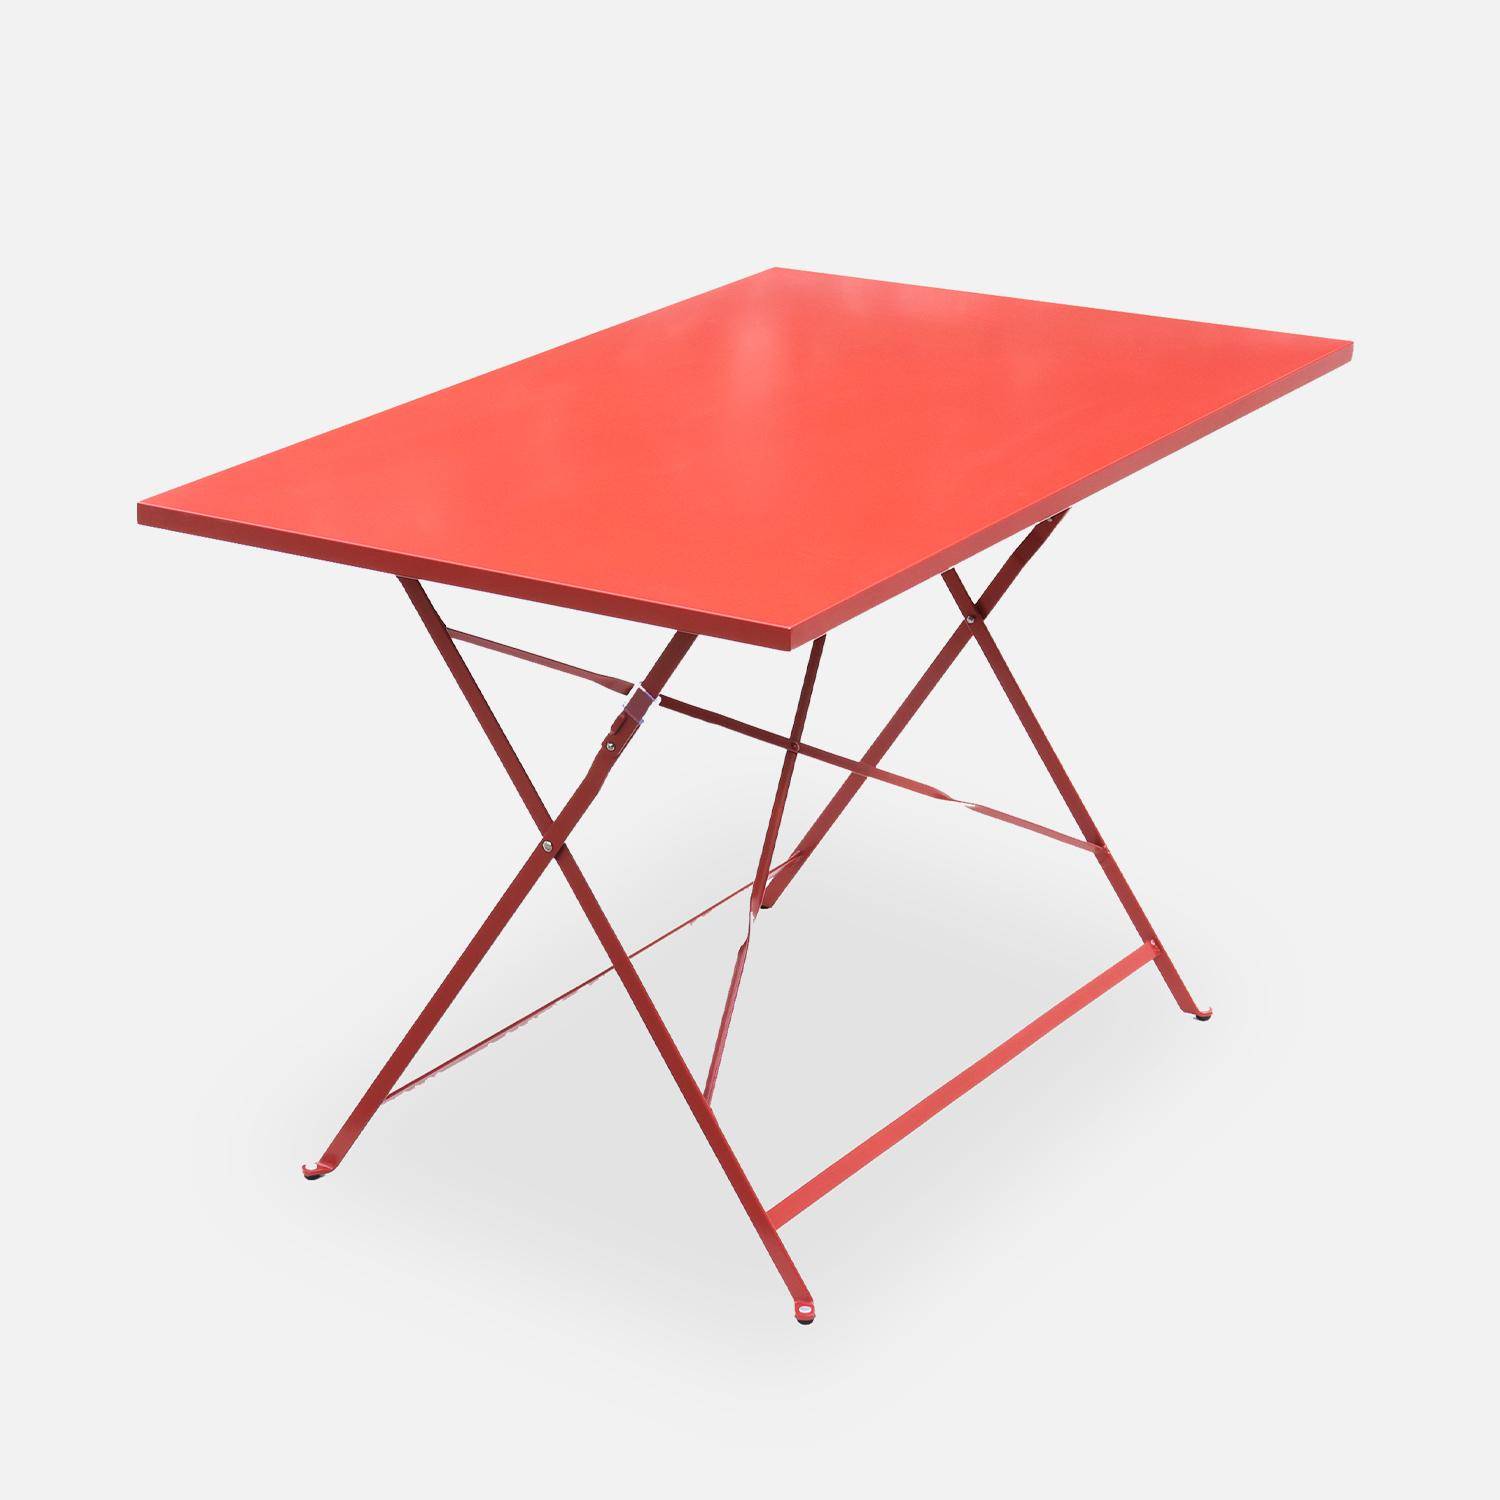 4-seater foldable thermo-lacquered steel bistro garden table with chairs, 110x70cm - Emilia - Terracotta,sweeek,Photo3